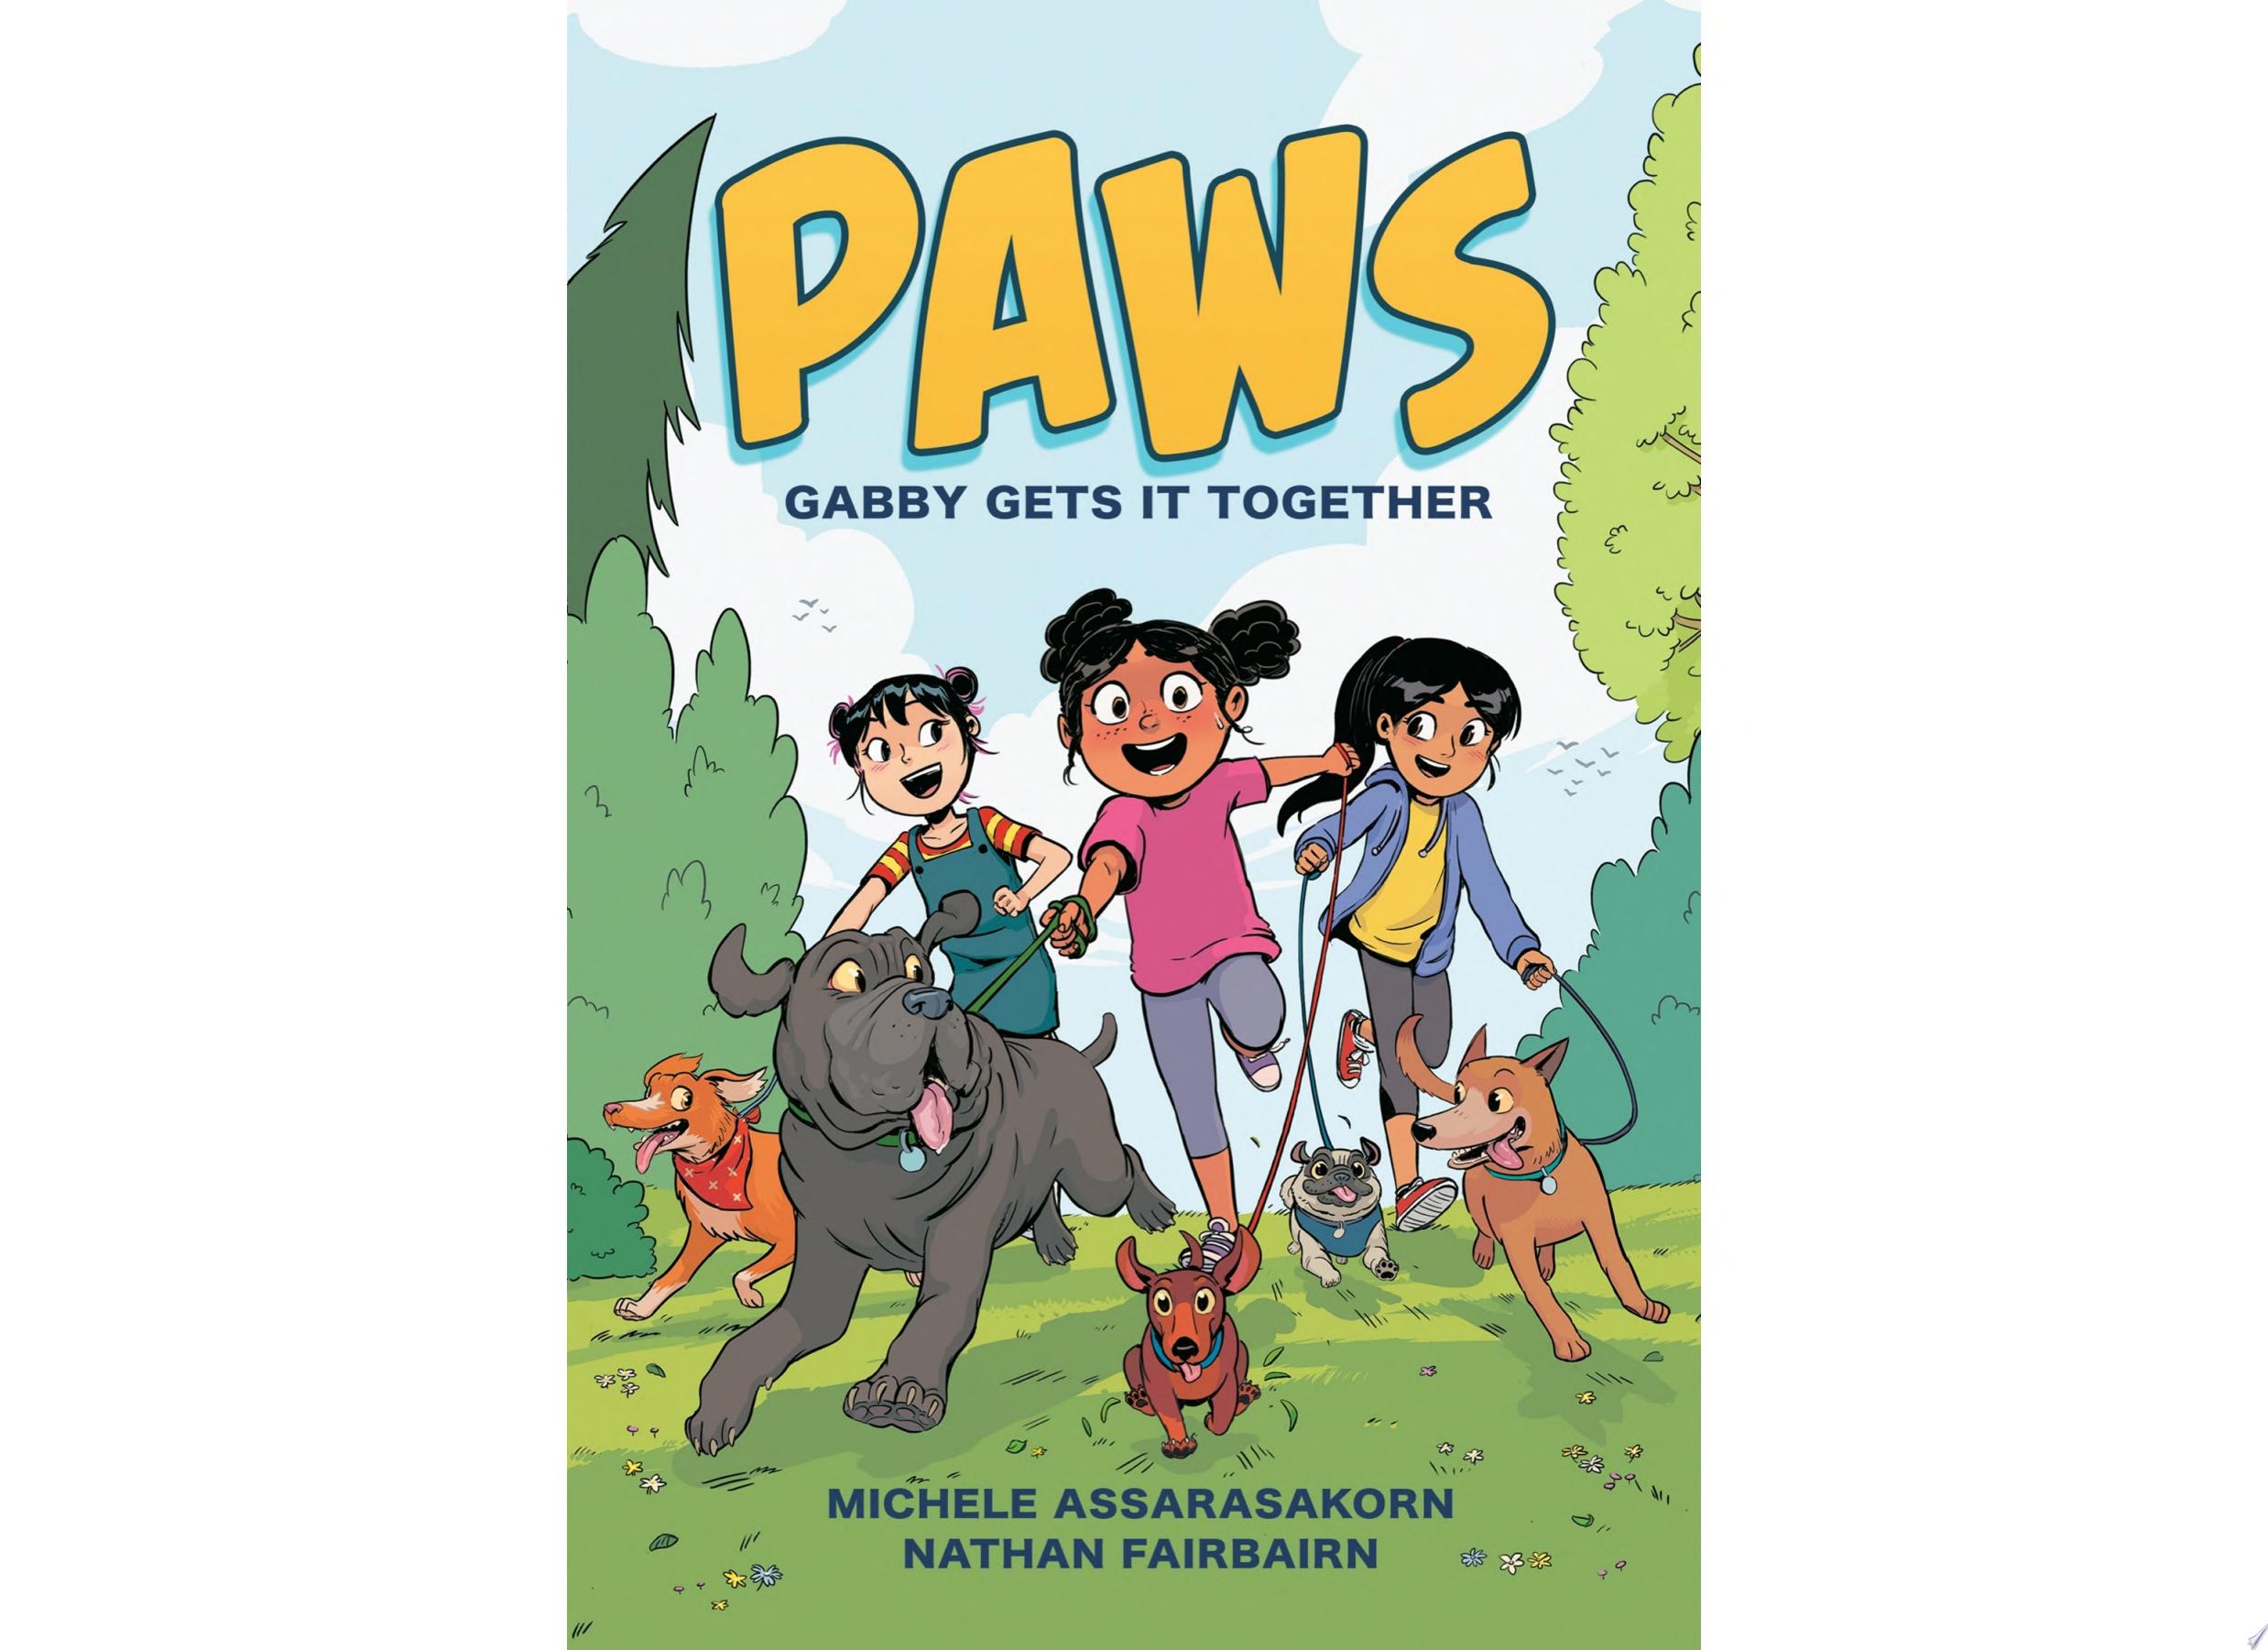 Image for "PAWS: Gabby Gets It Together"